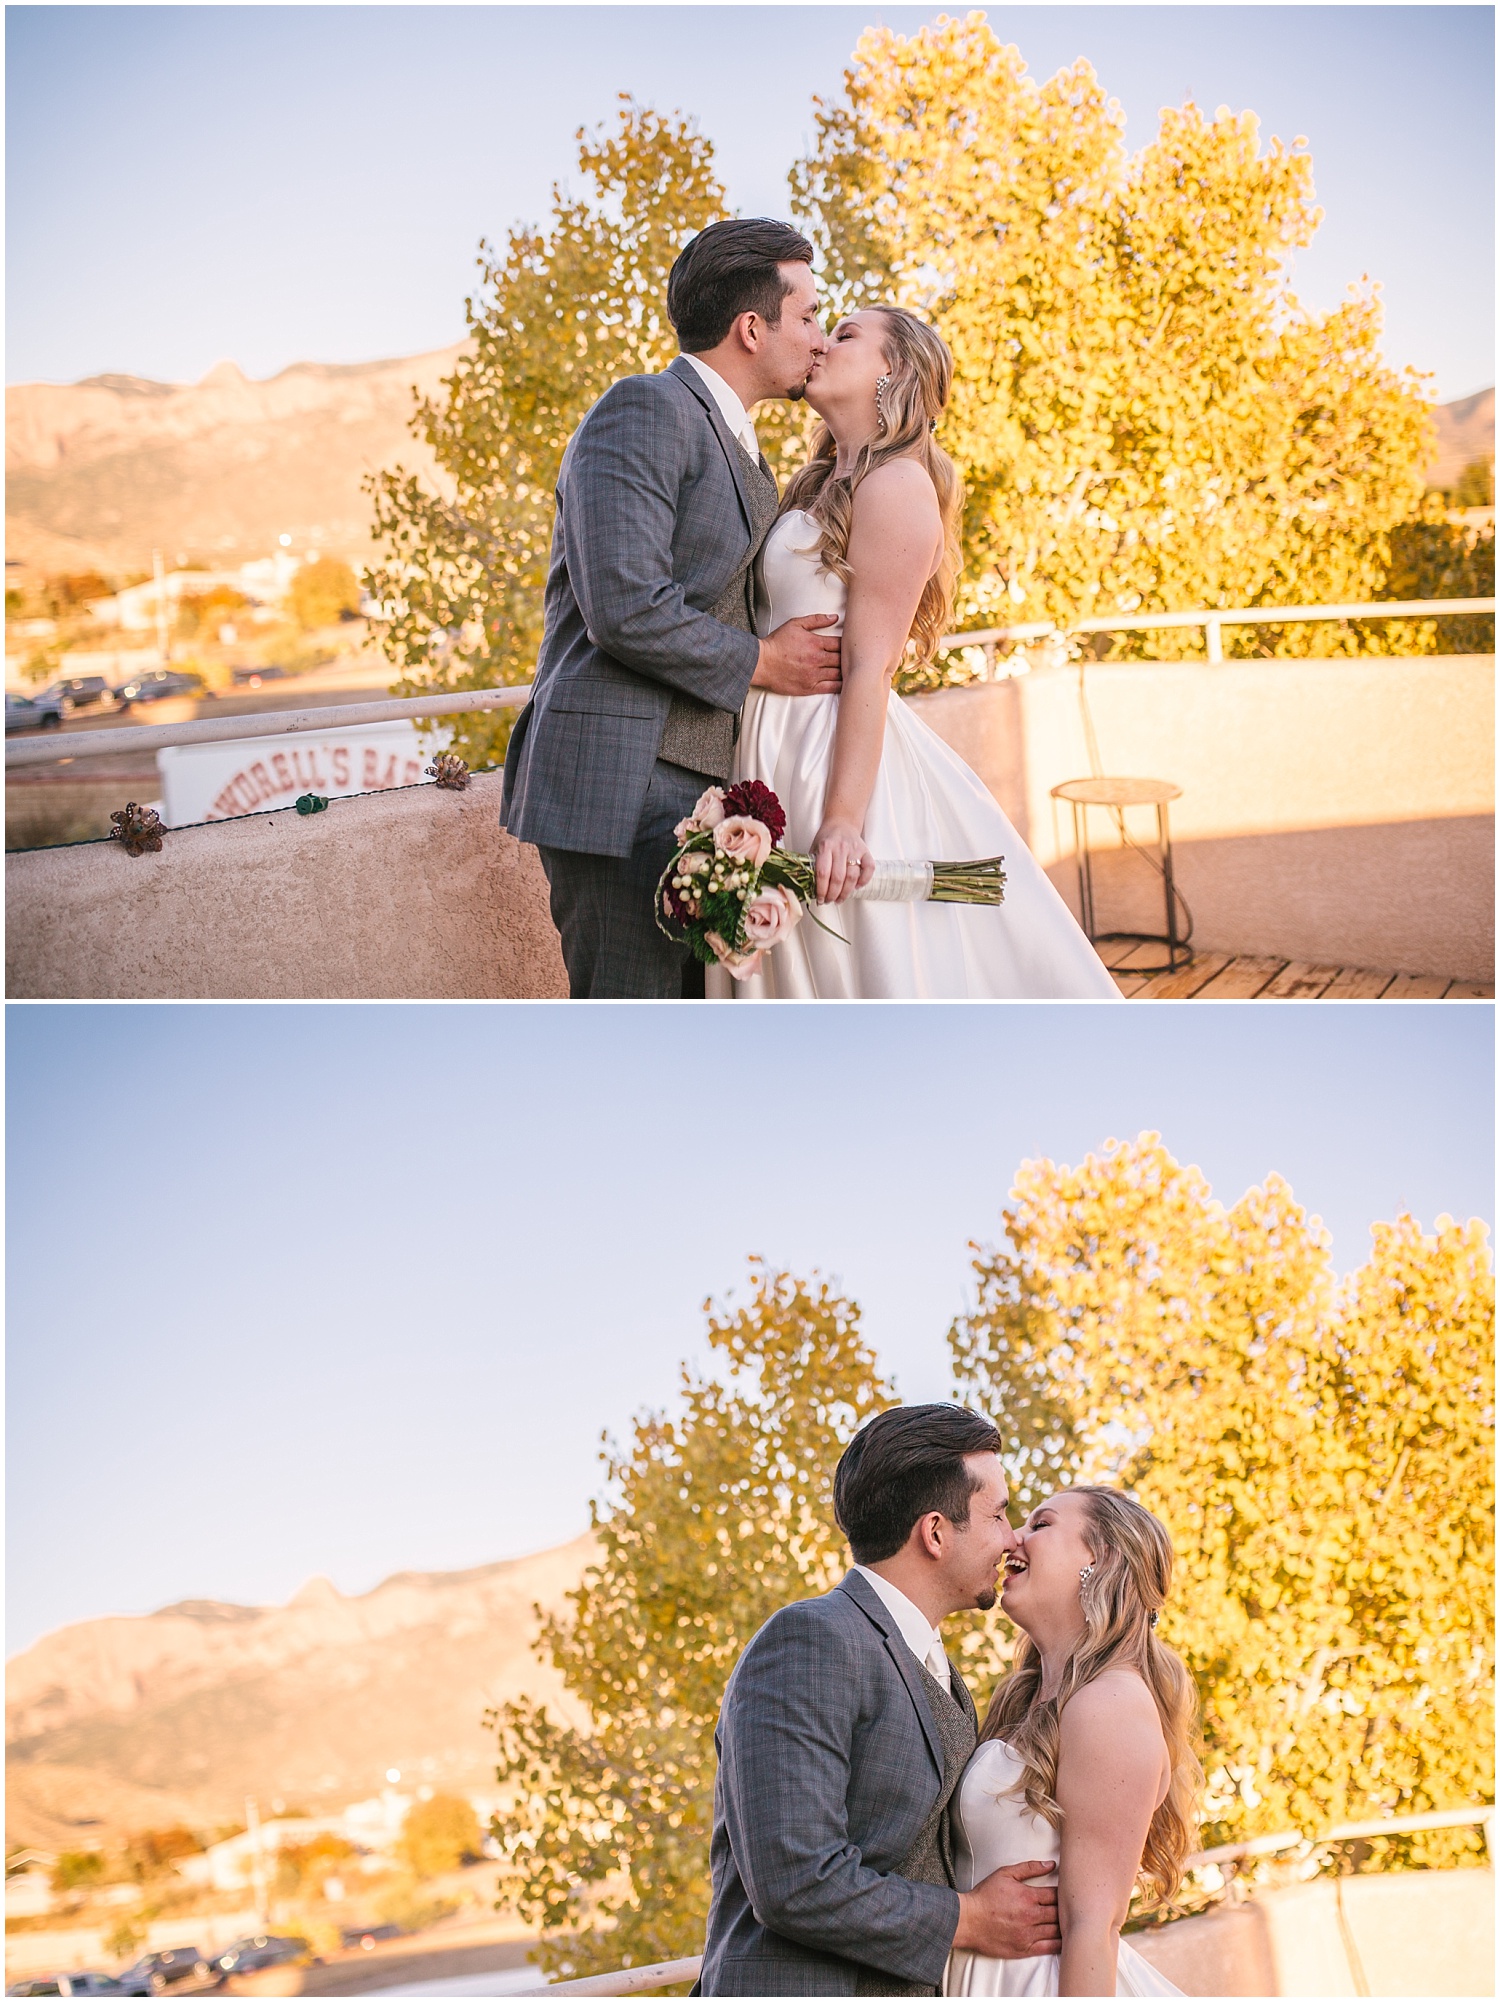 Bride and groom kissing on the balcony overlooking the Sandia Mountains during golden hour at NE Albuquerque Acres wedding